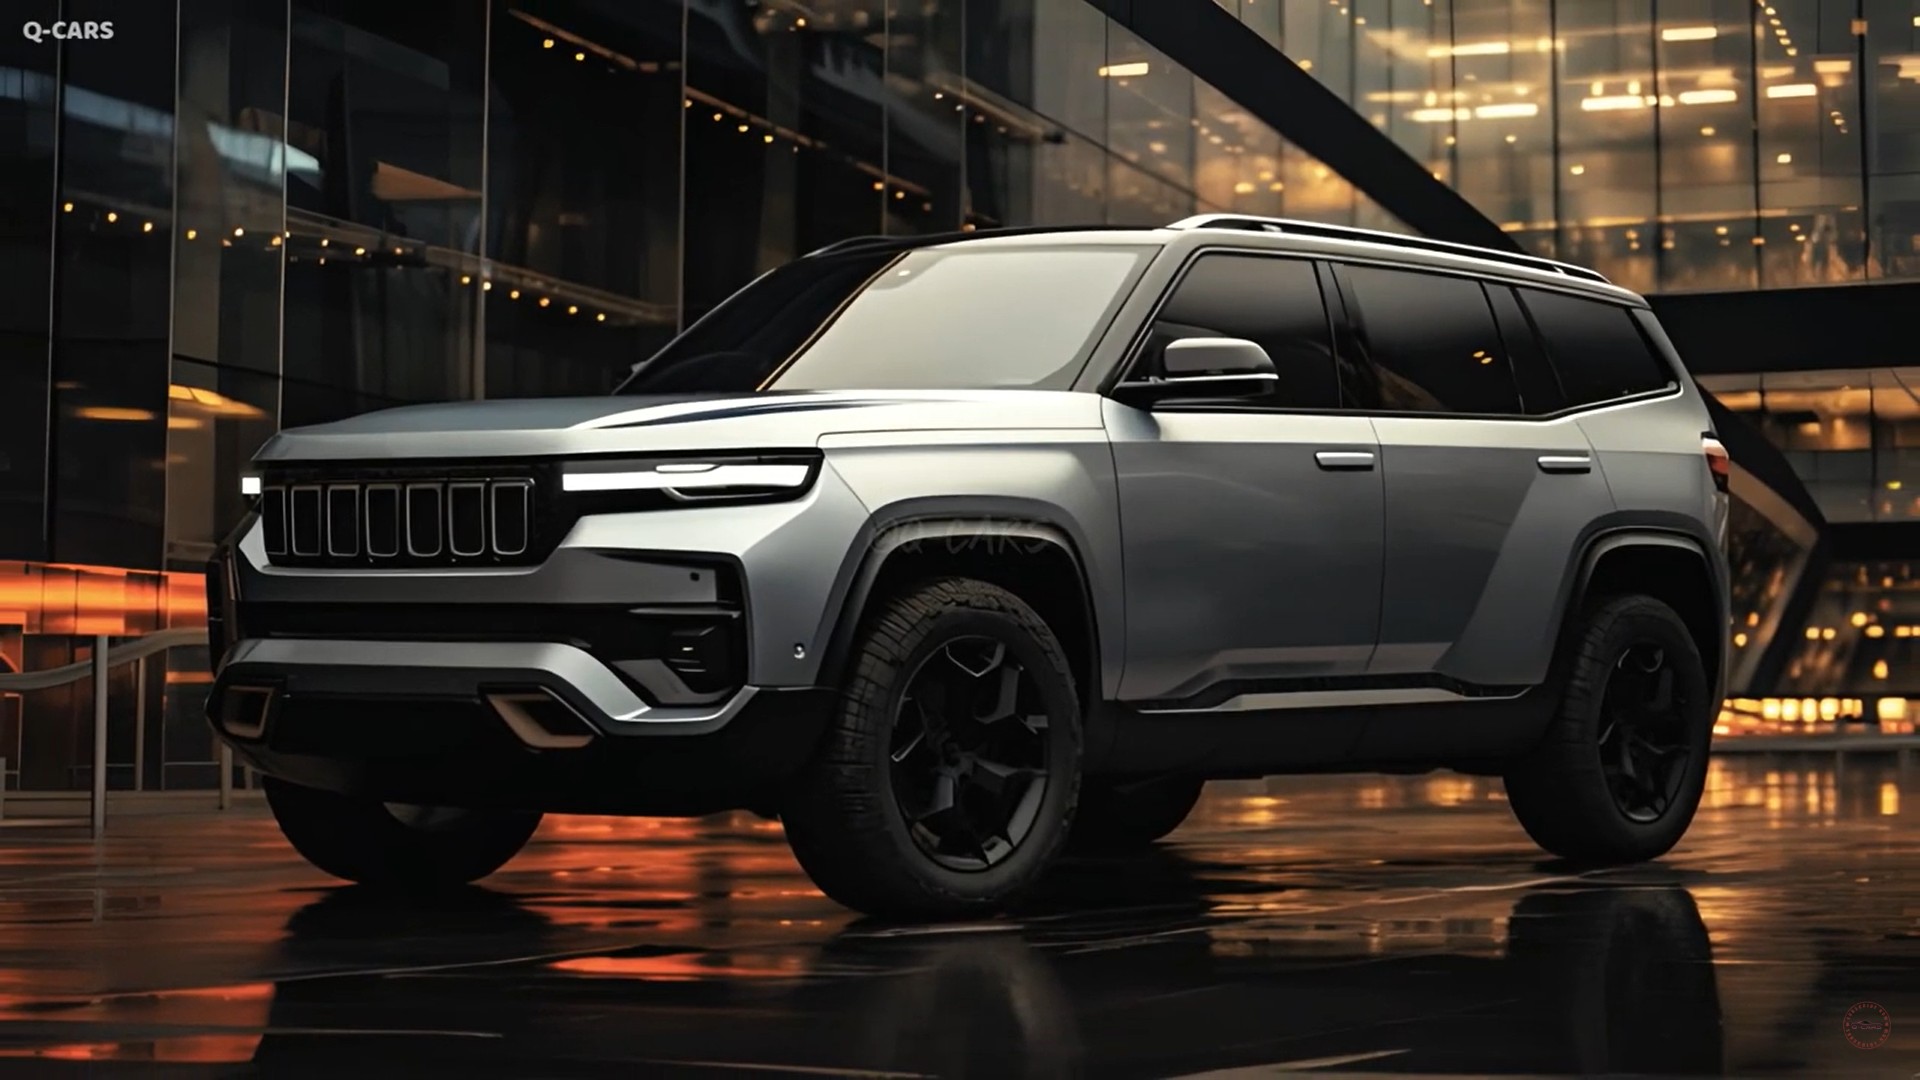 Rumors Suggest 2.0-Liter Four Engine for 2025 Jeep Grand Cherokee